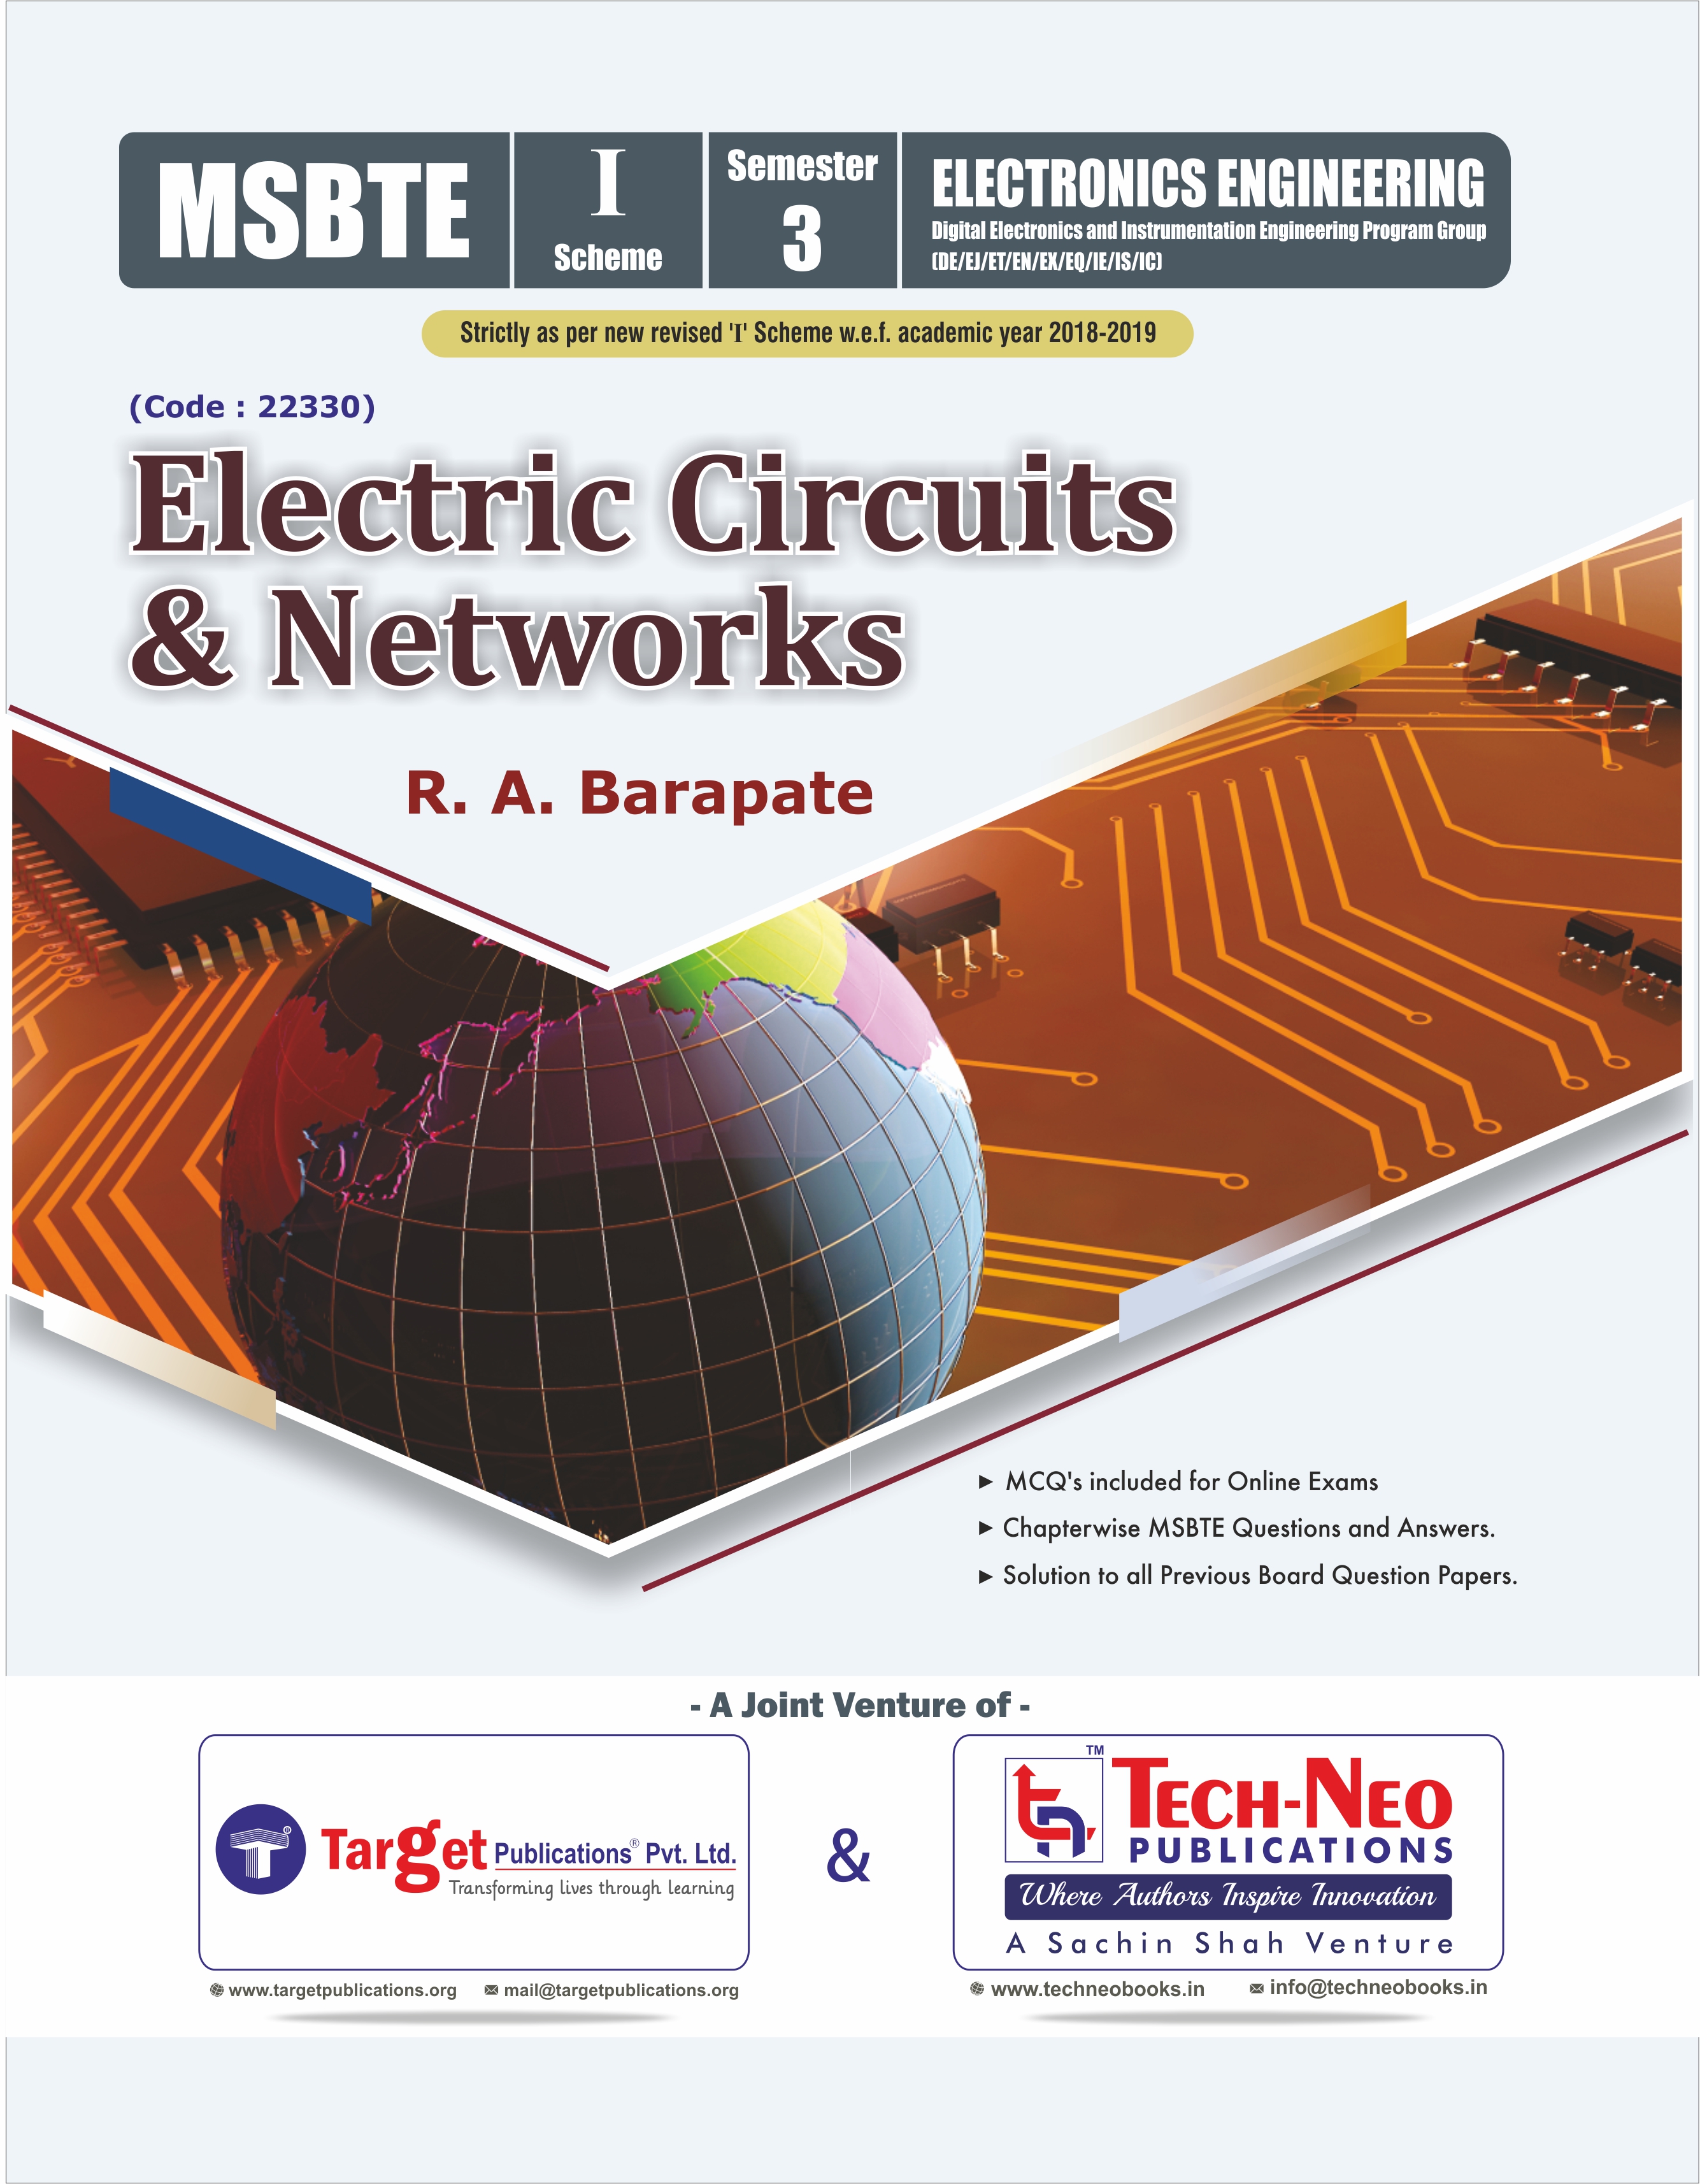 Electronic Circuits and Networks